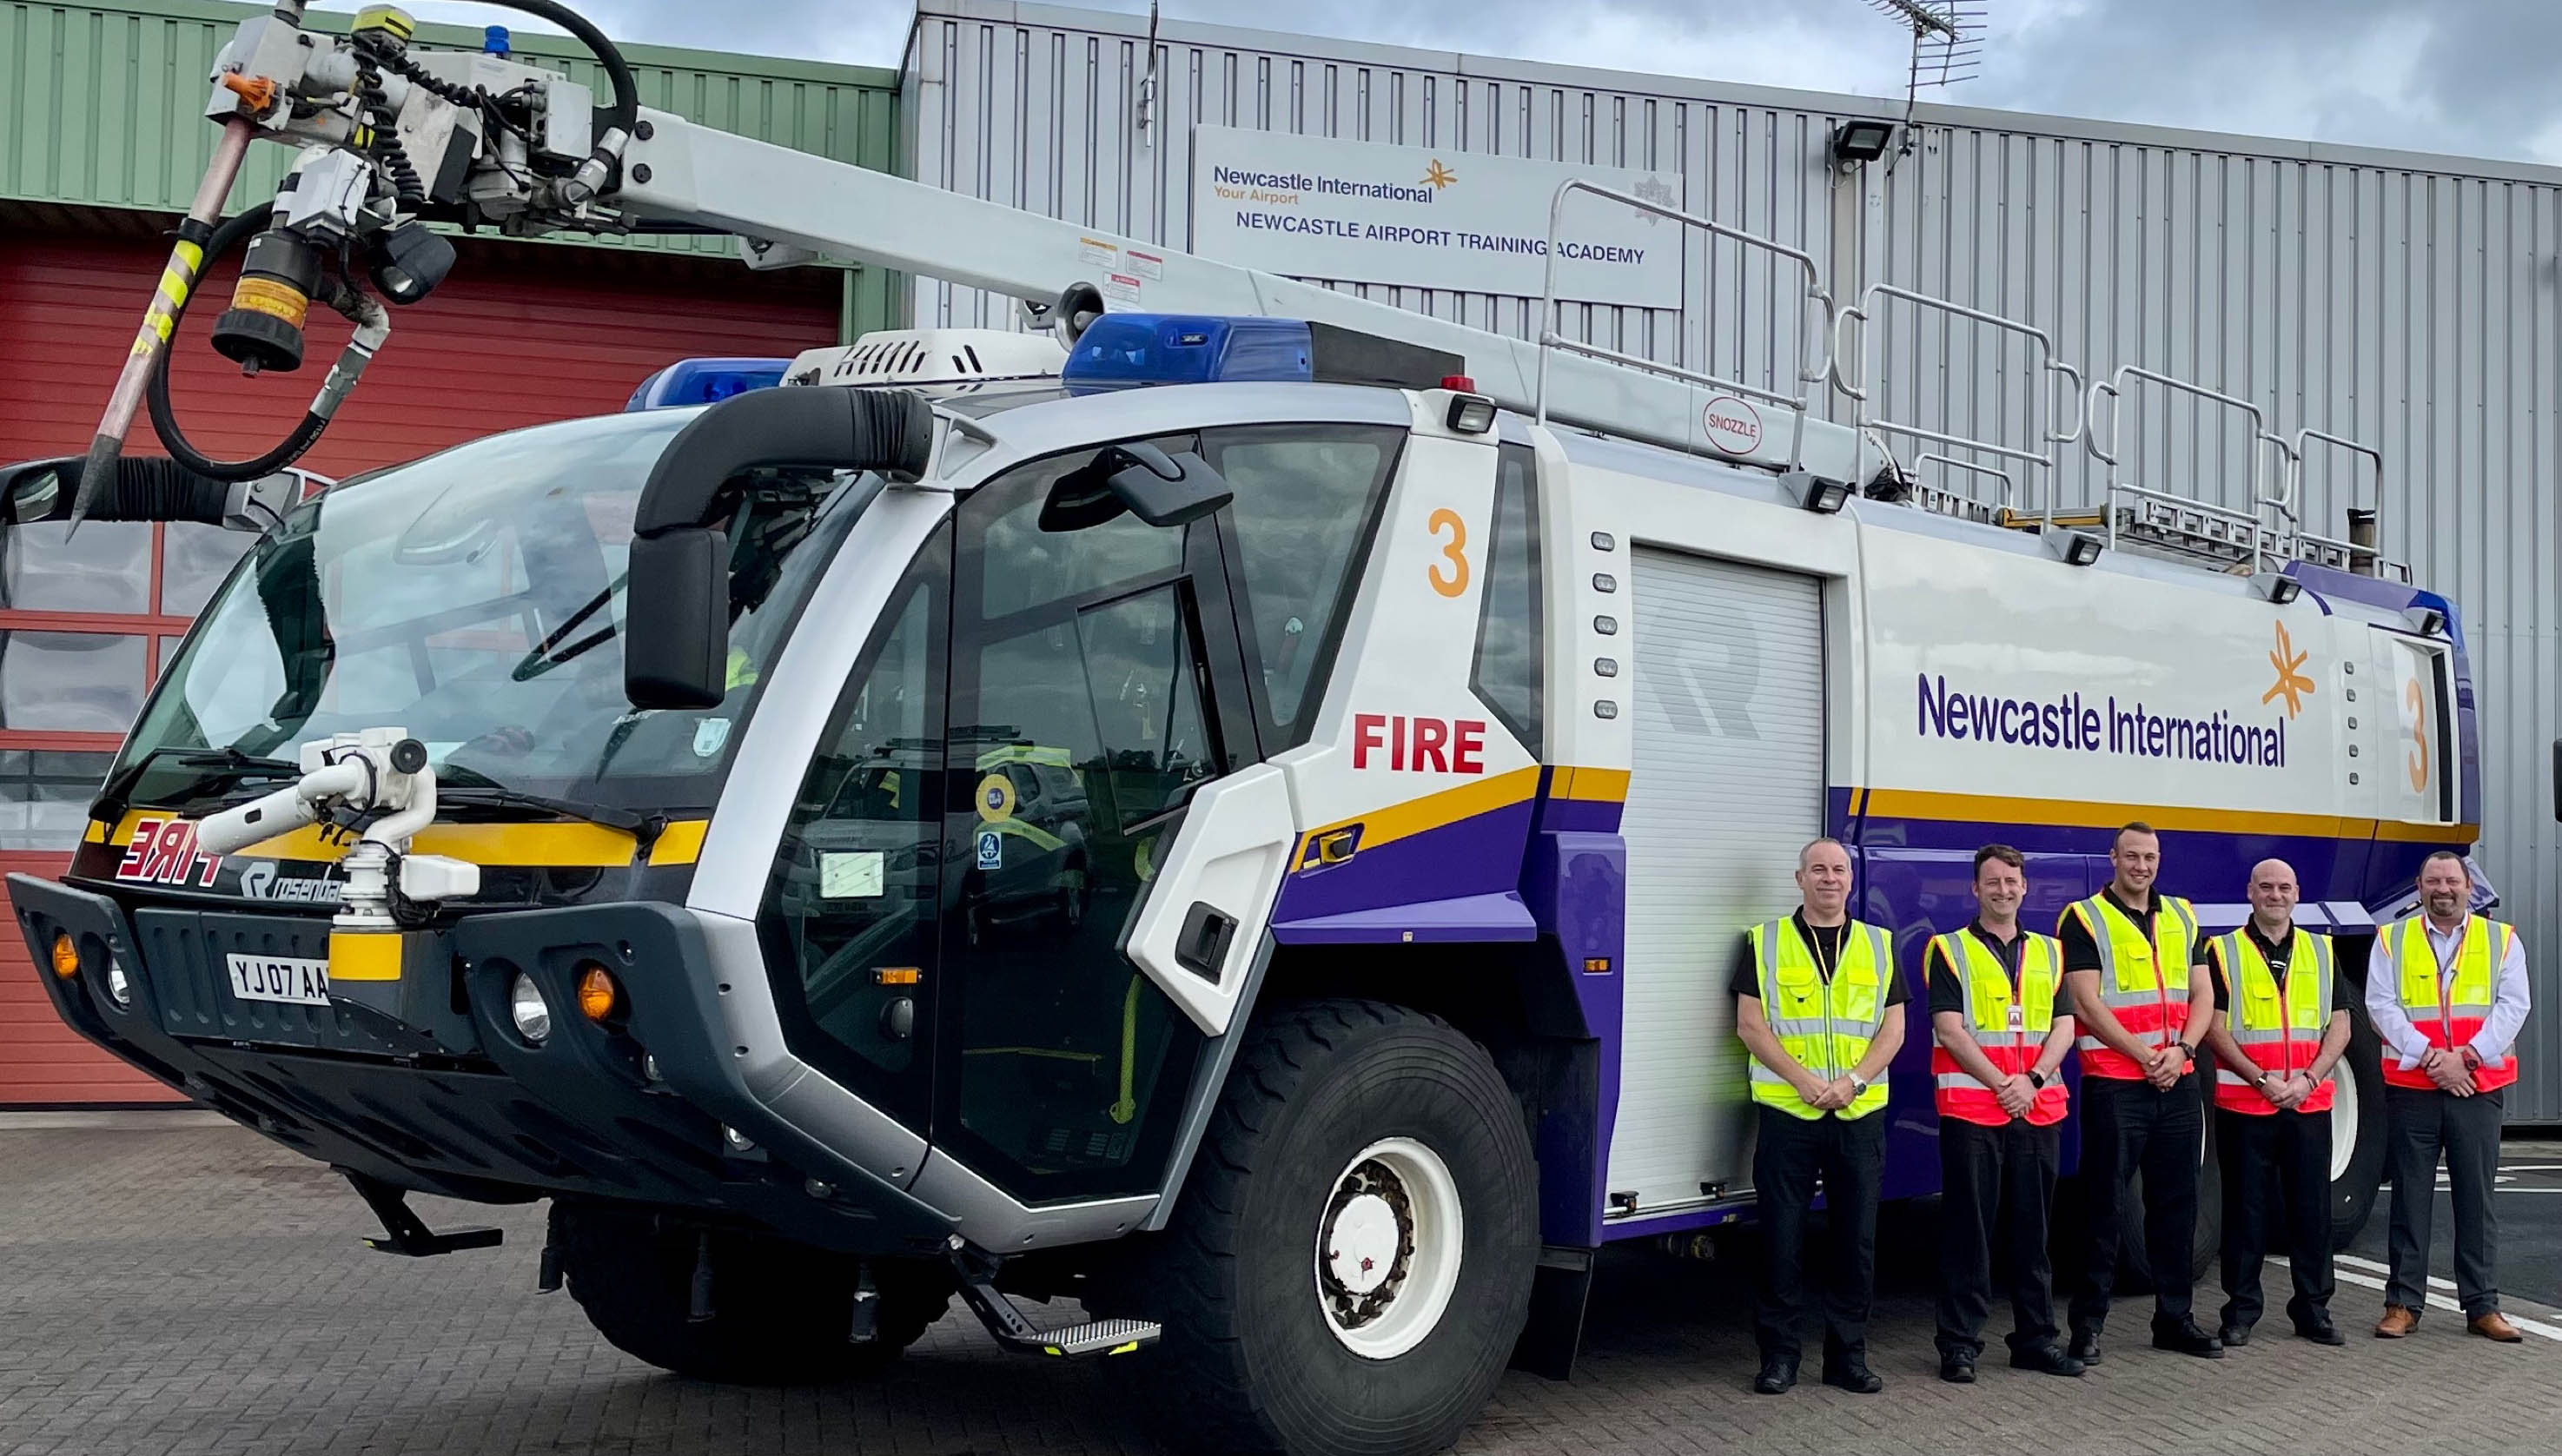 The Newcastle Airport Fire Service (AFS) is a client of Emergency Response Driver Training (ERDT), using eCom's LMS, eNetLearn